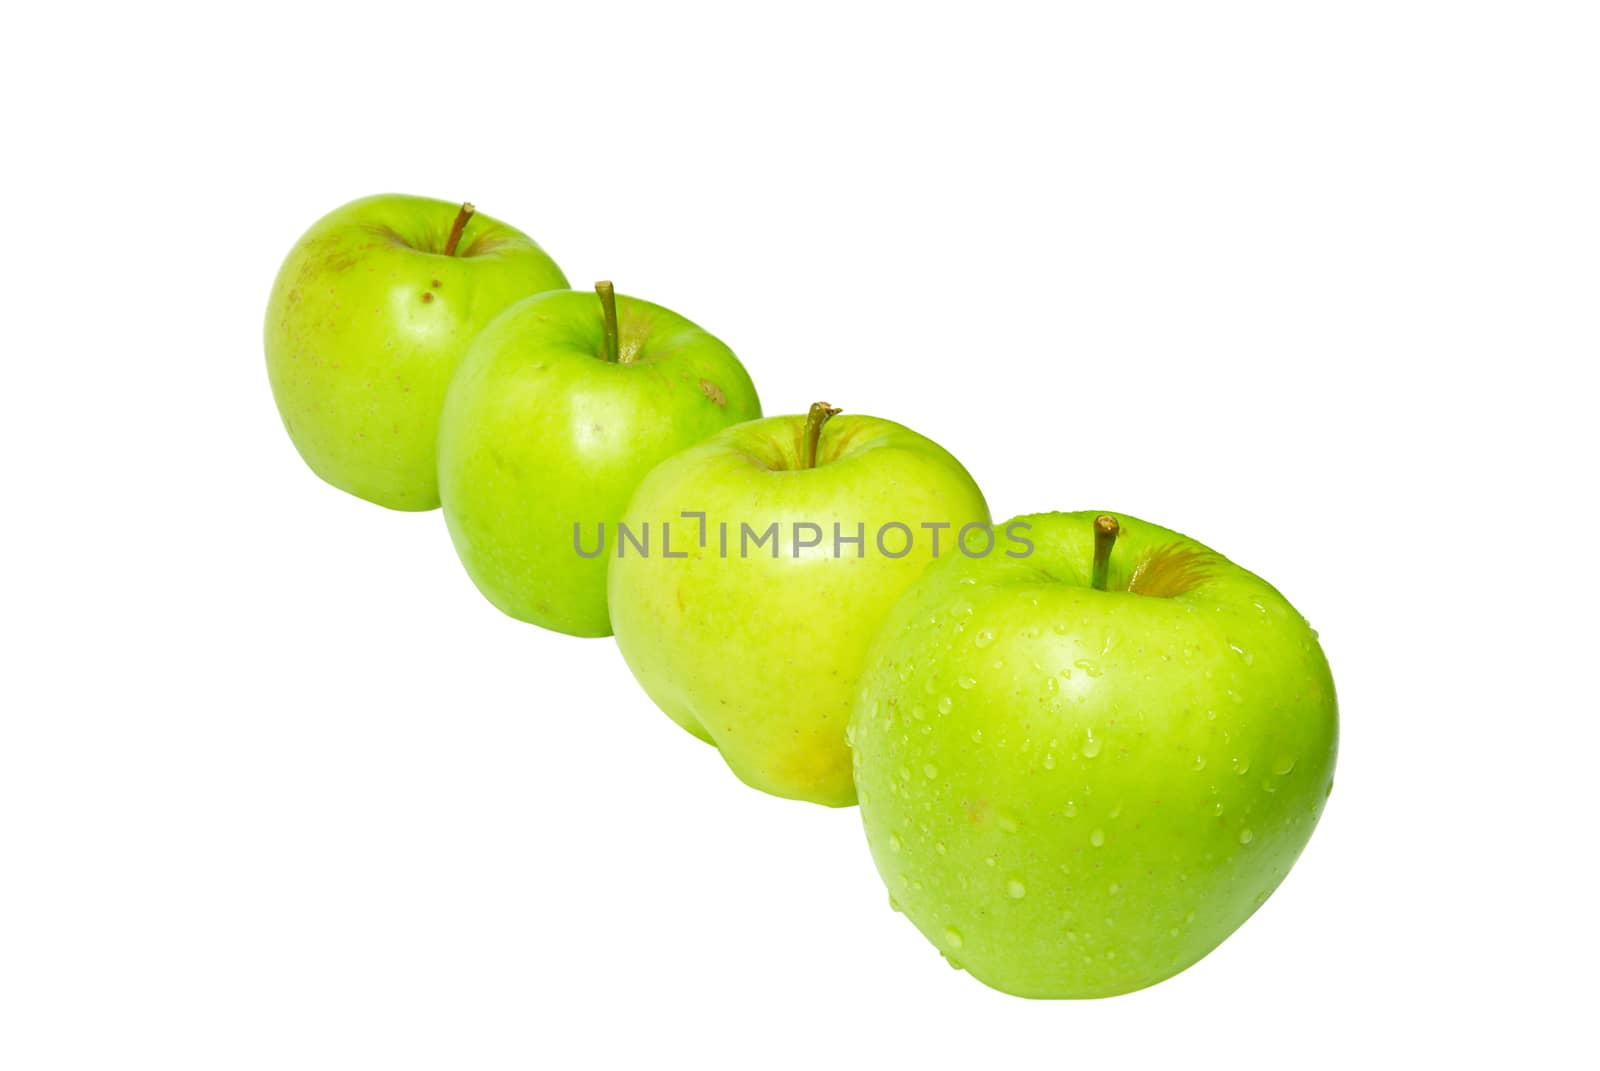 Row of green apples isolated on white.